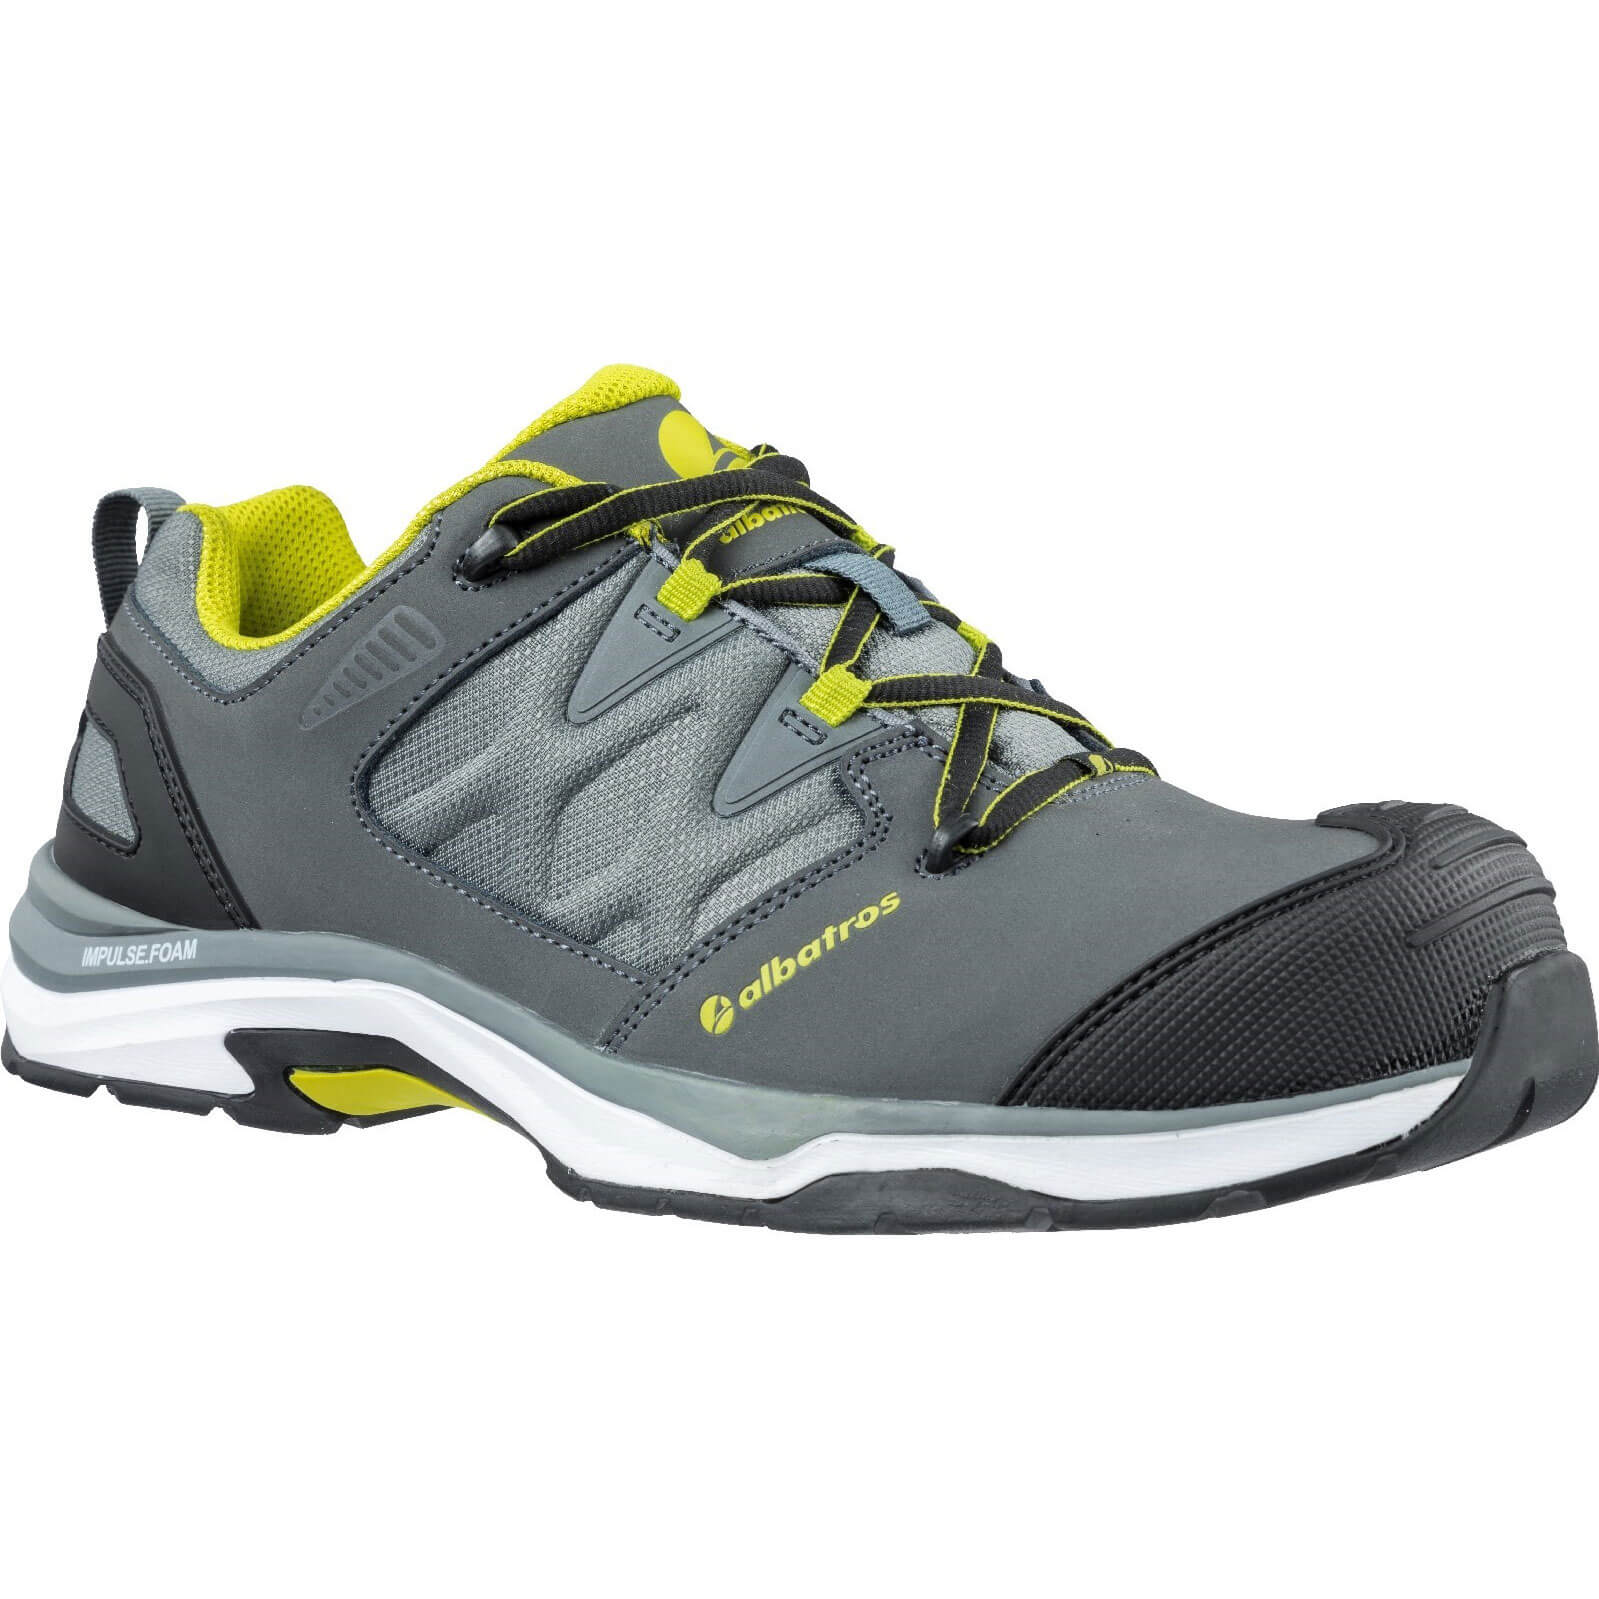 Image of Albatros Ultratrail Low Lace Up Safety Shoe Grey Size 10.5